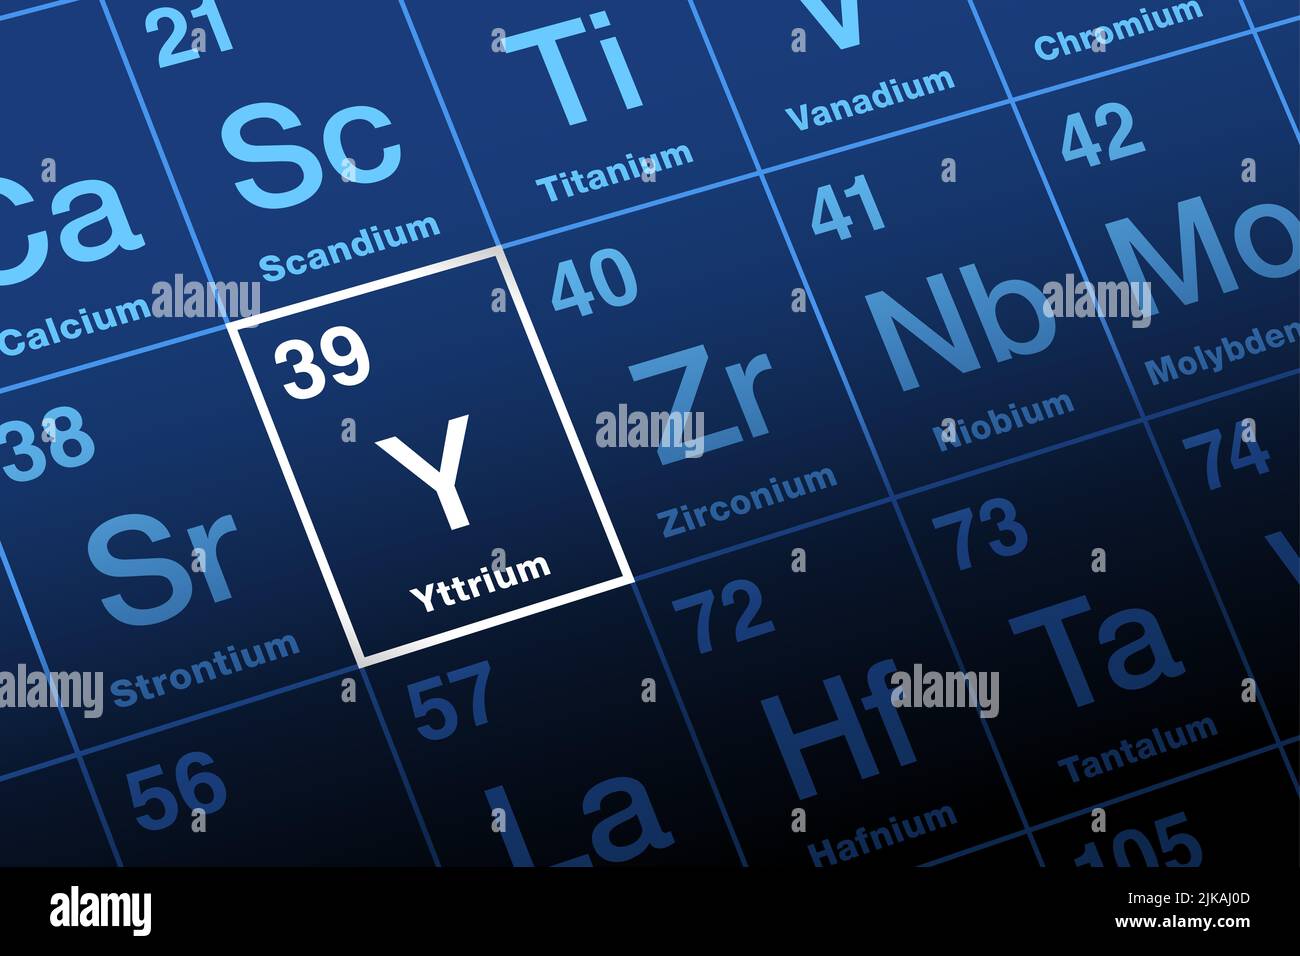 Yttrium on periodic table. Transition metal and rare earth element, with symbol Y, from mineral ytterbite, first identified at Ytterby, Sweden. Stock Photo